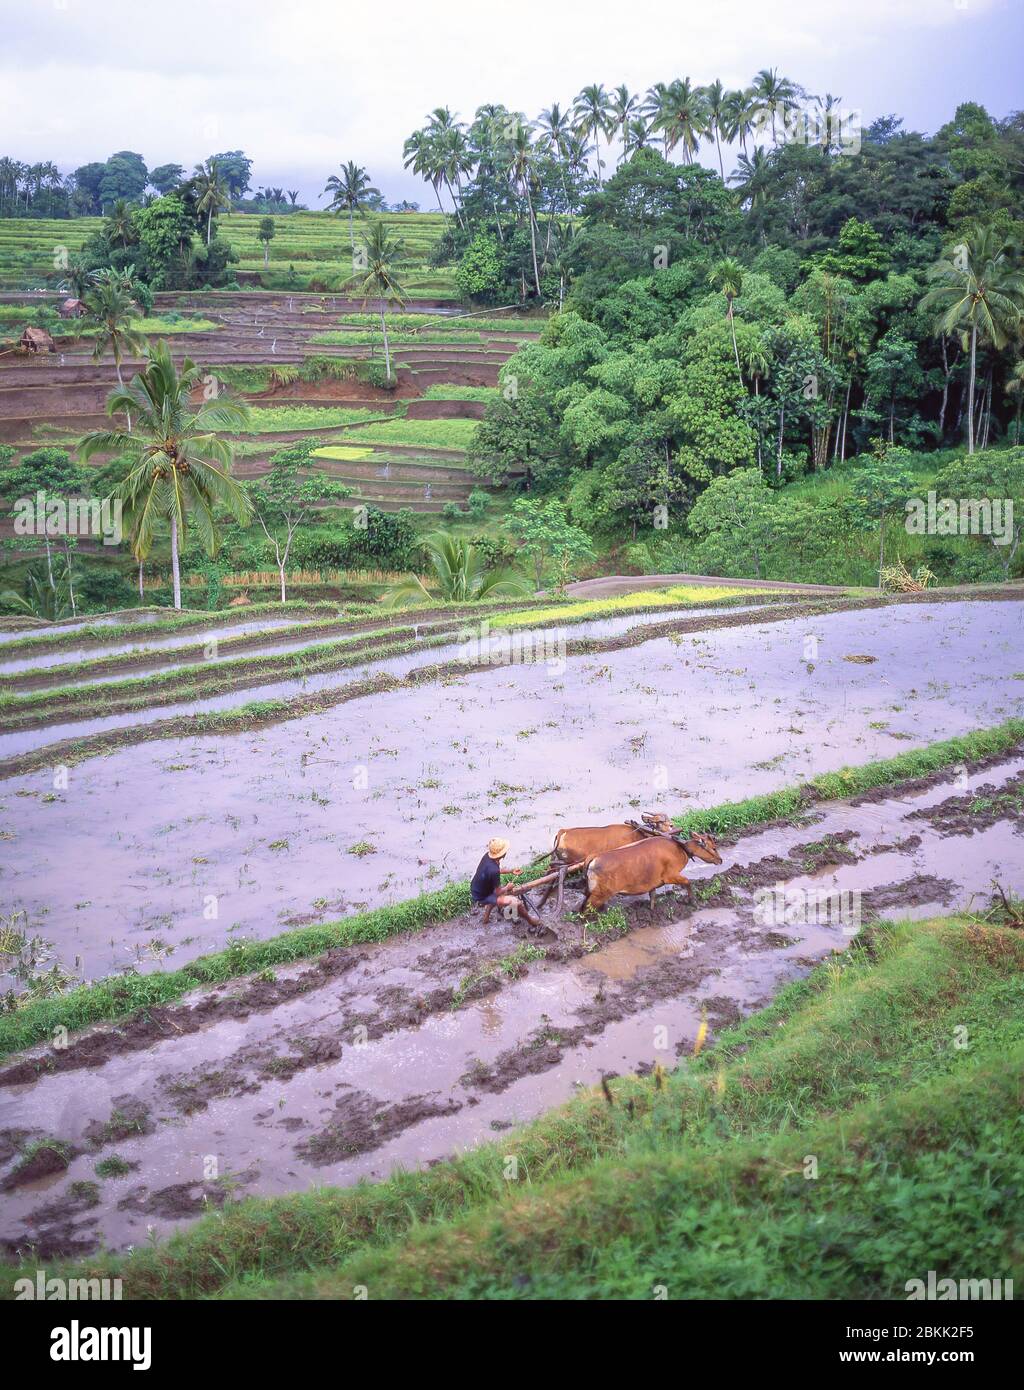 Farmer tilling rice paddy fields with team of oxen, Bali, Republic of Indonesia Stock Photo